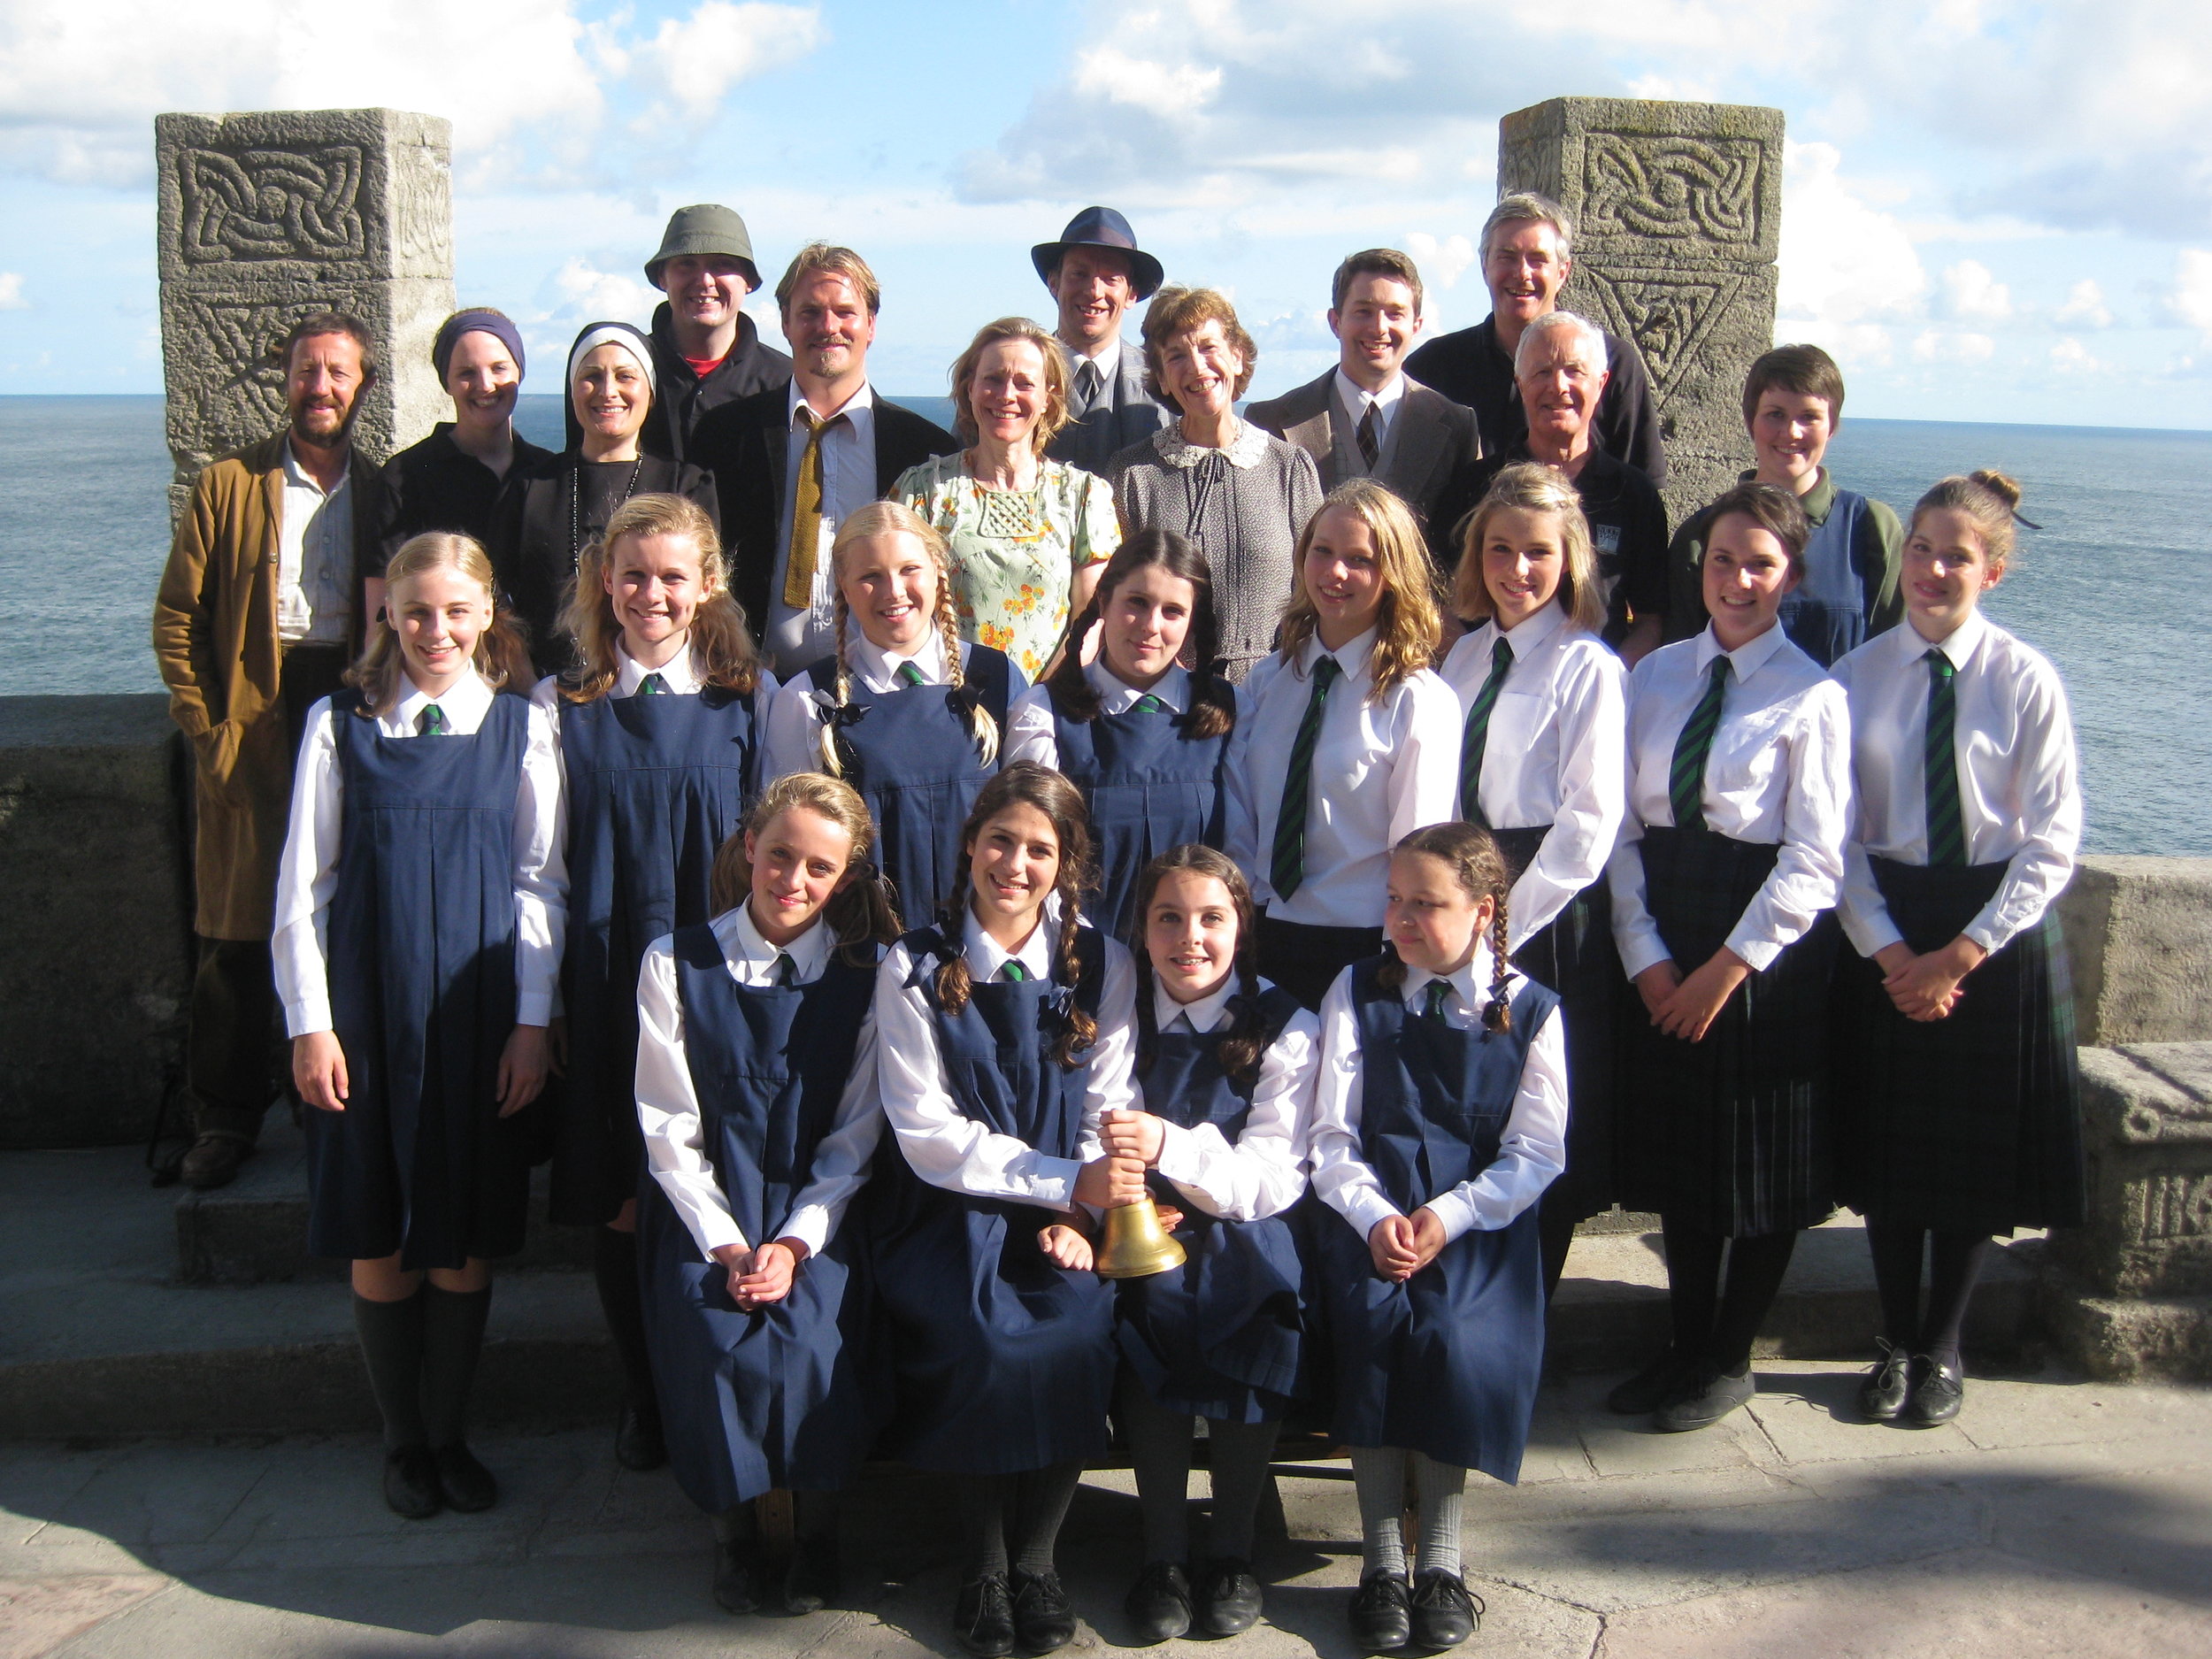 The cast and crew of The Prime of Miss Jean Brodie (2011)